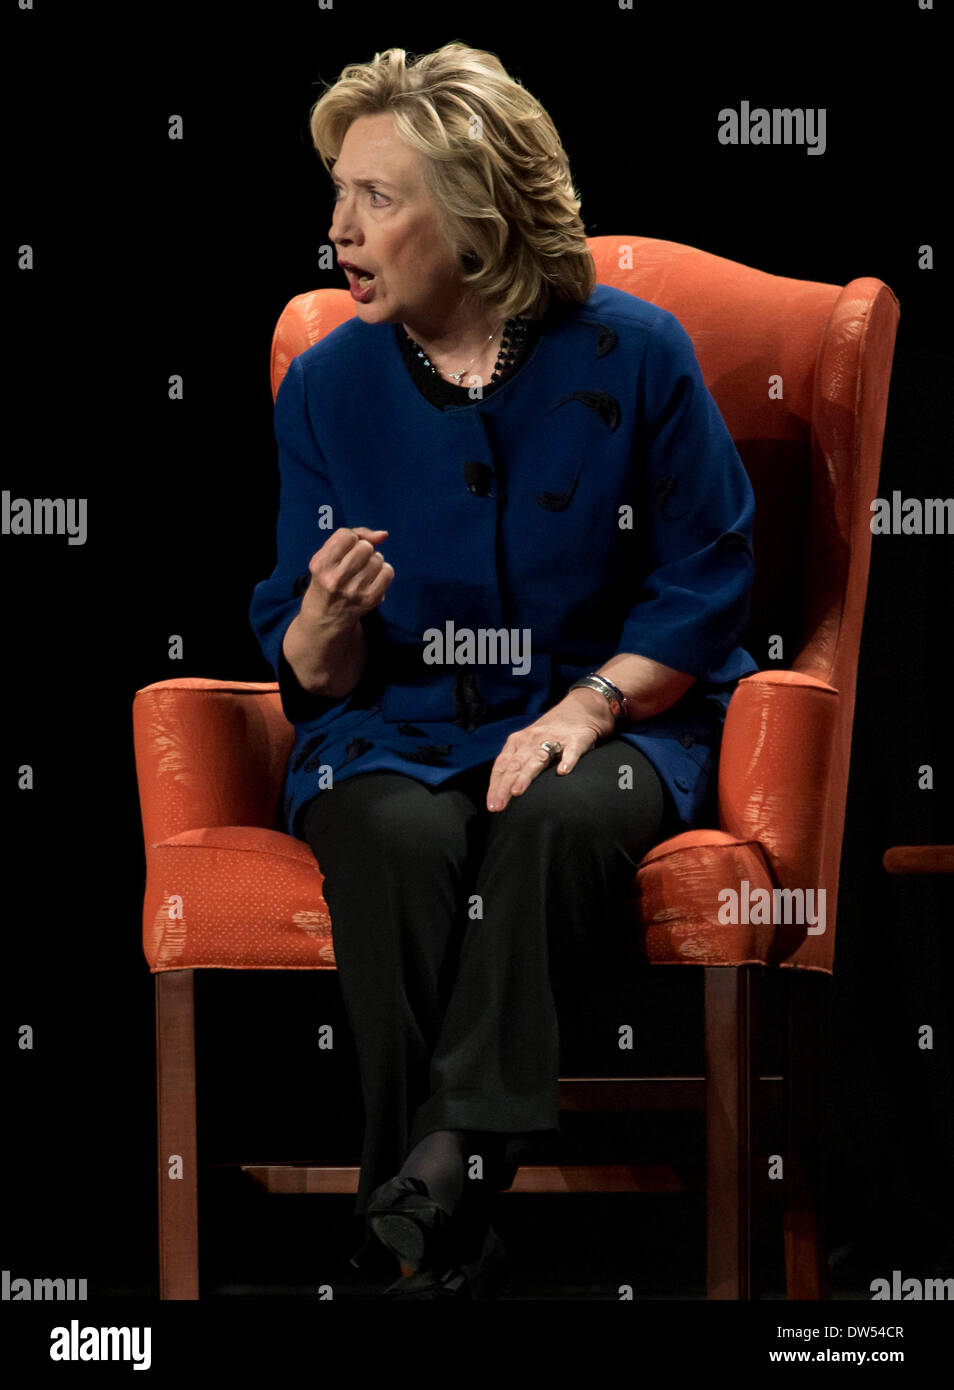 Coral Gables, Florida, USA. 26th Feb, 2014. HILLARY CLINTON answers questions from the audience after delivering remarks to students, faculty, staff and invited guests at the BankUnited Center on the campus of the University of Miami. Credit:  Brian Cahn/ZUMAPRESS.com/Alamy Live News Stock Photo